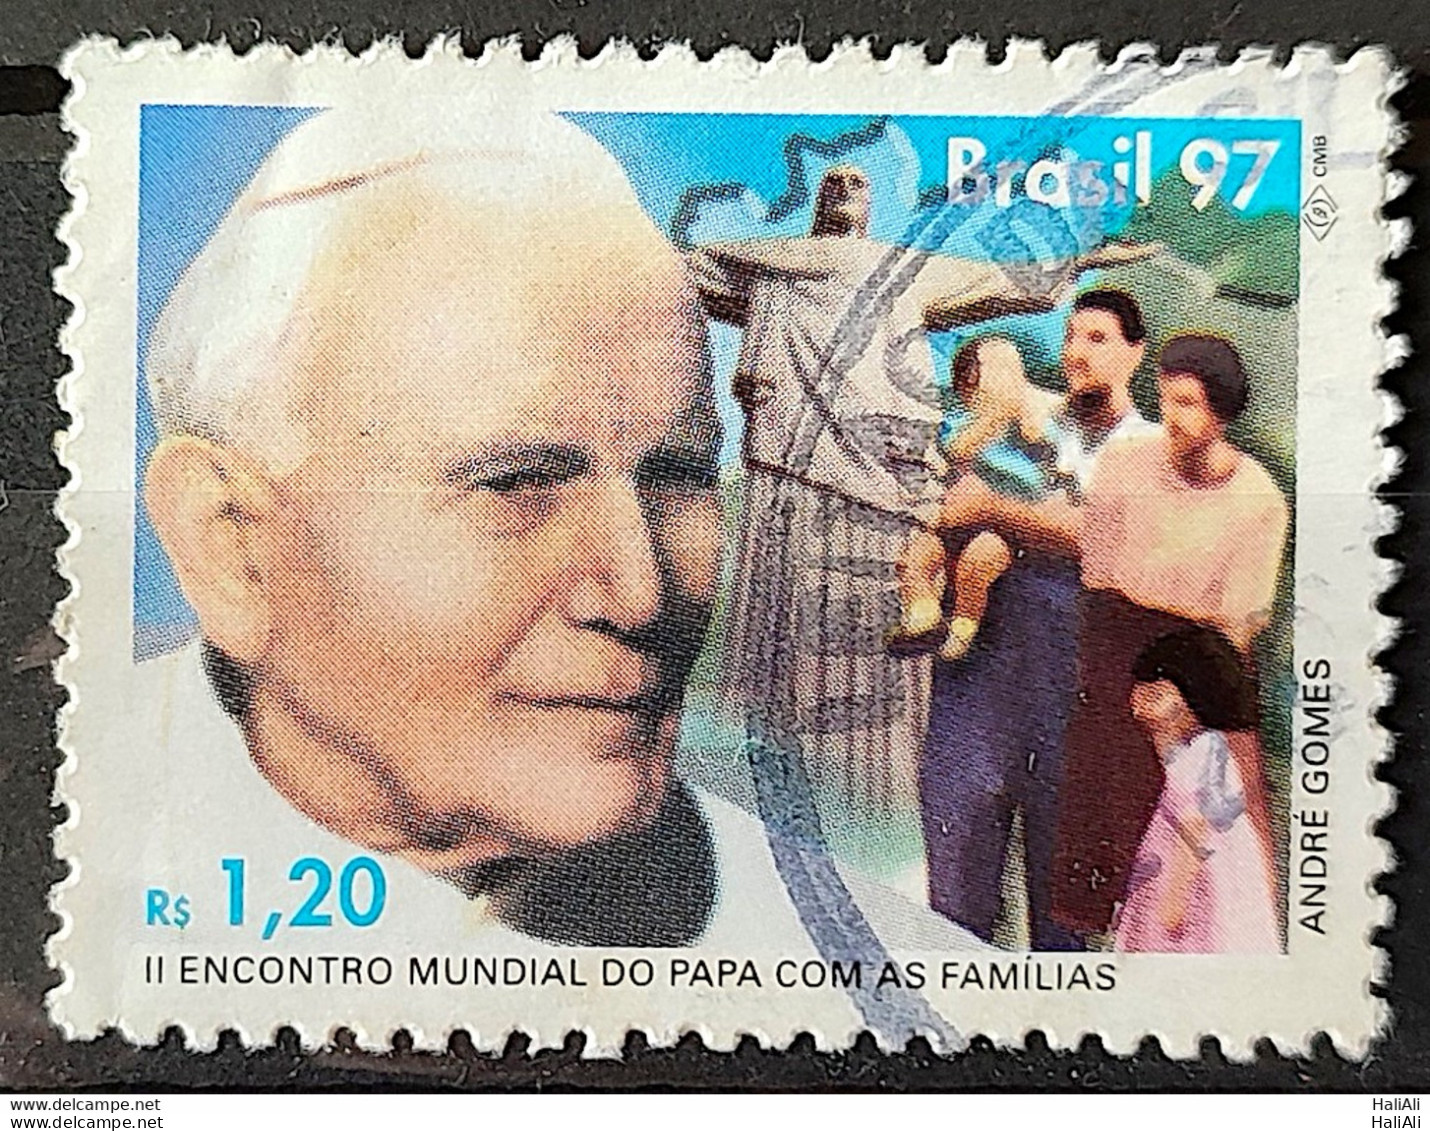 C 2043 Brazil Stamp World Pope Meeting With Families Religion 1997 Circulated 8 - Gebruikt